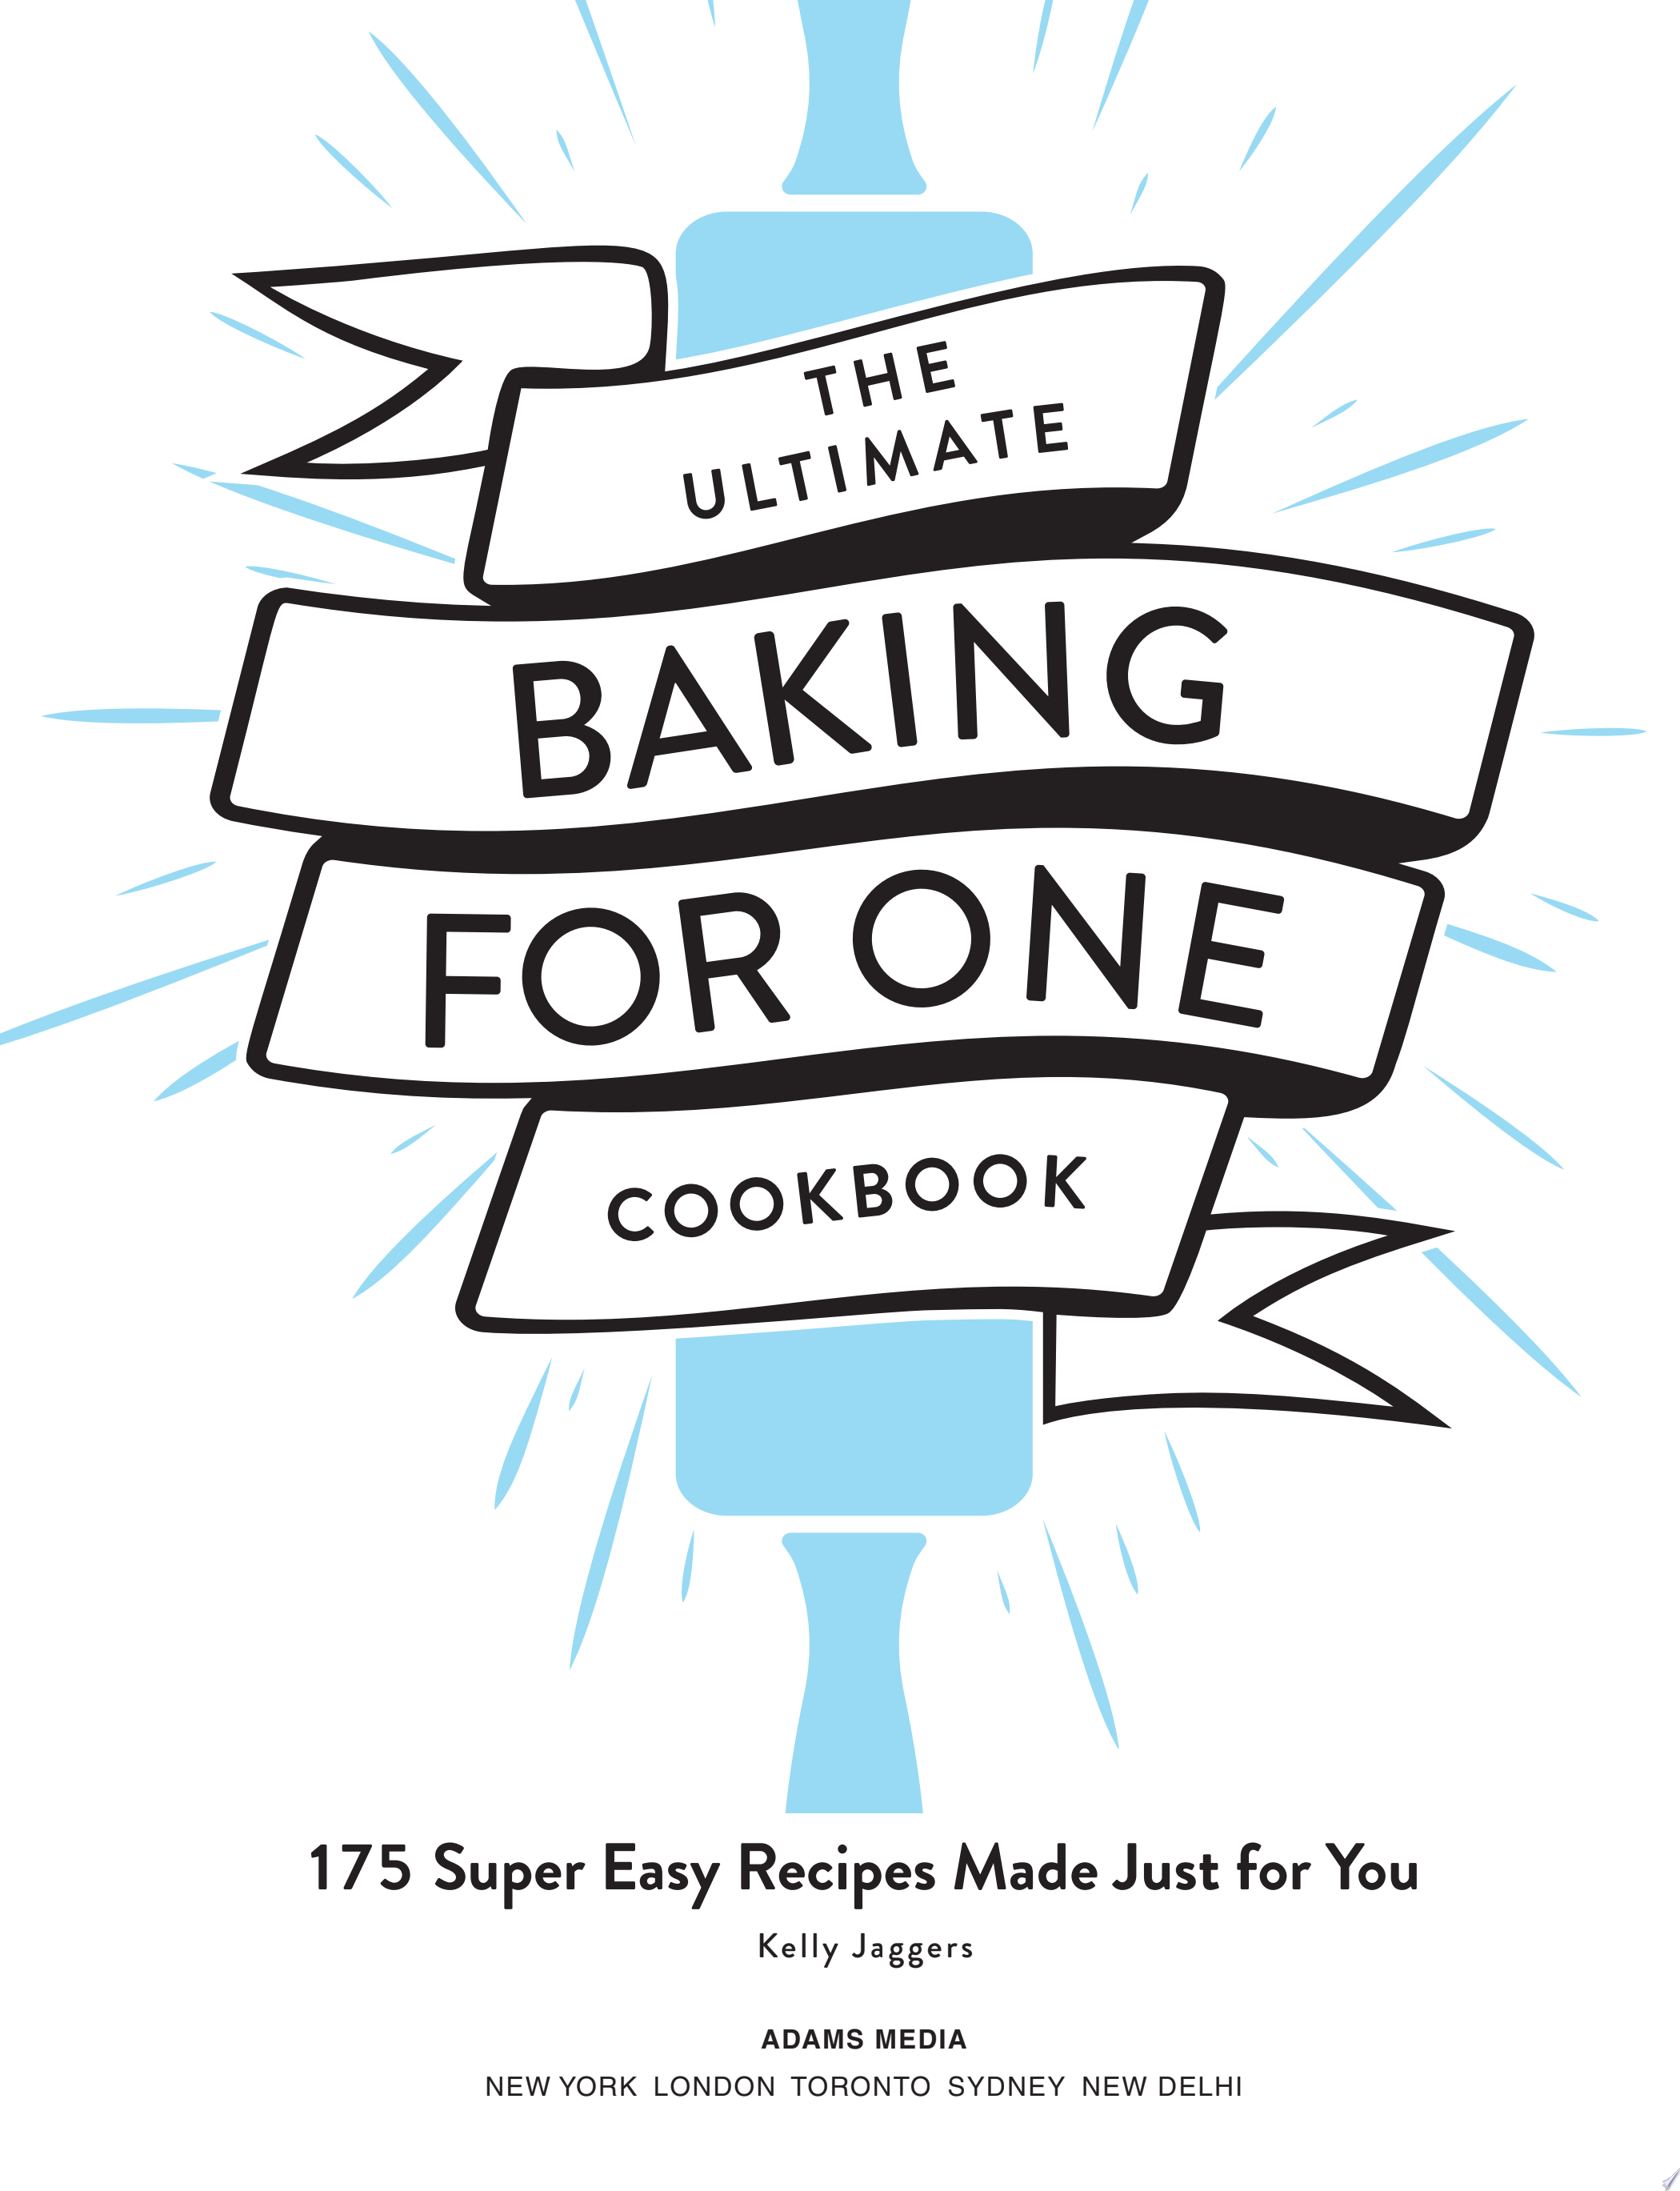 Image for "The Ultimate Baking for One Cookbook"